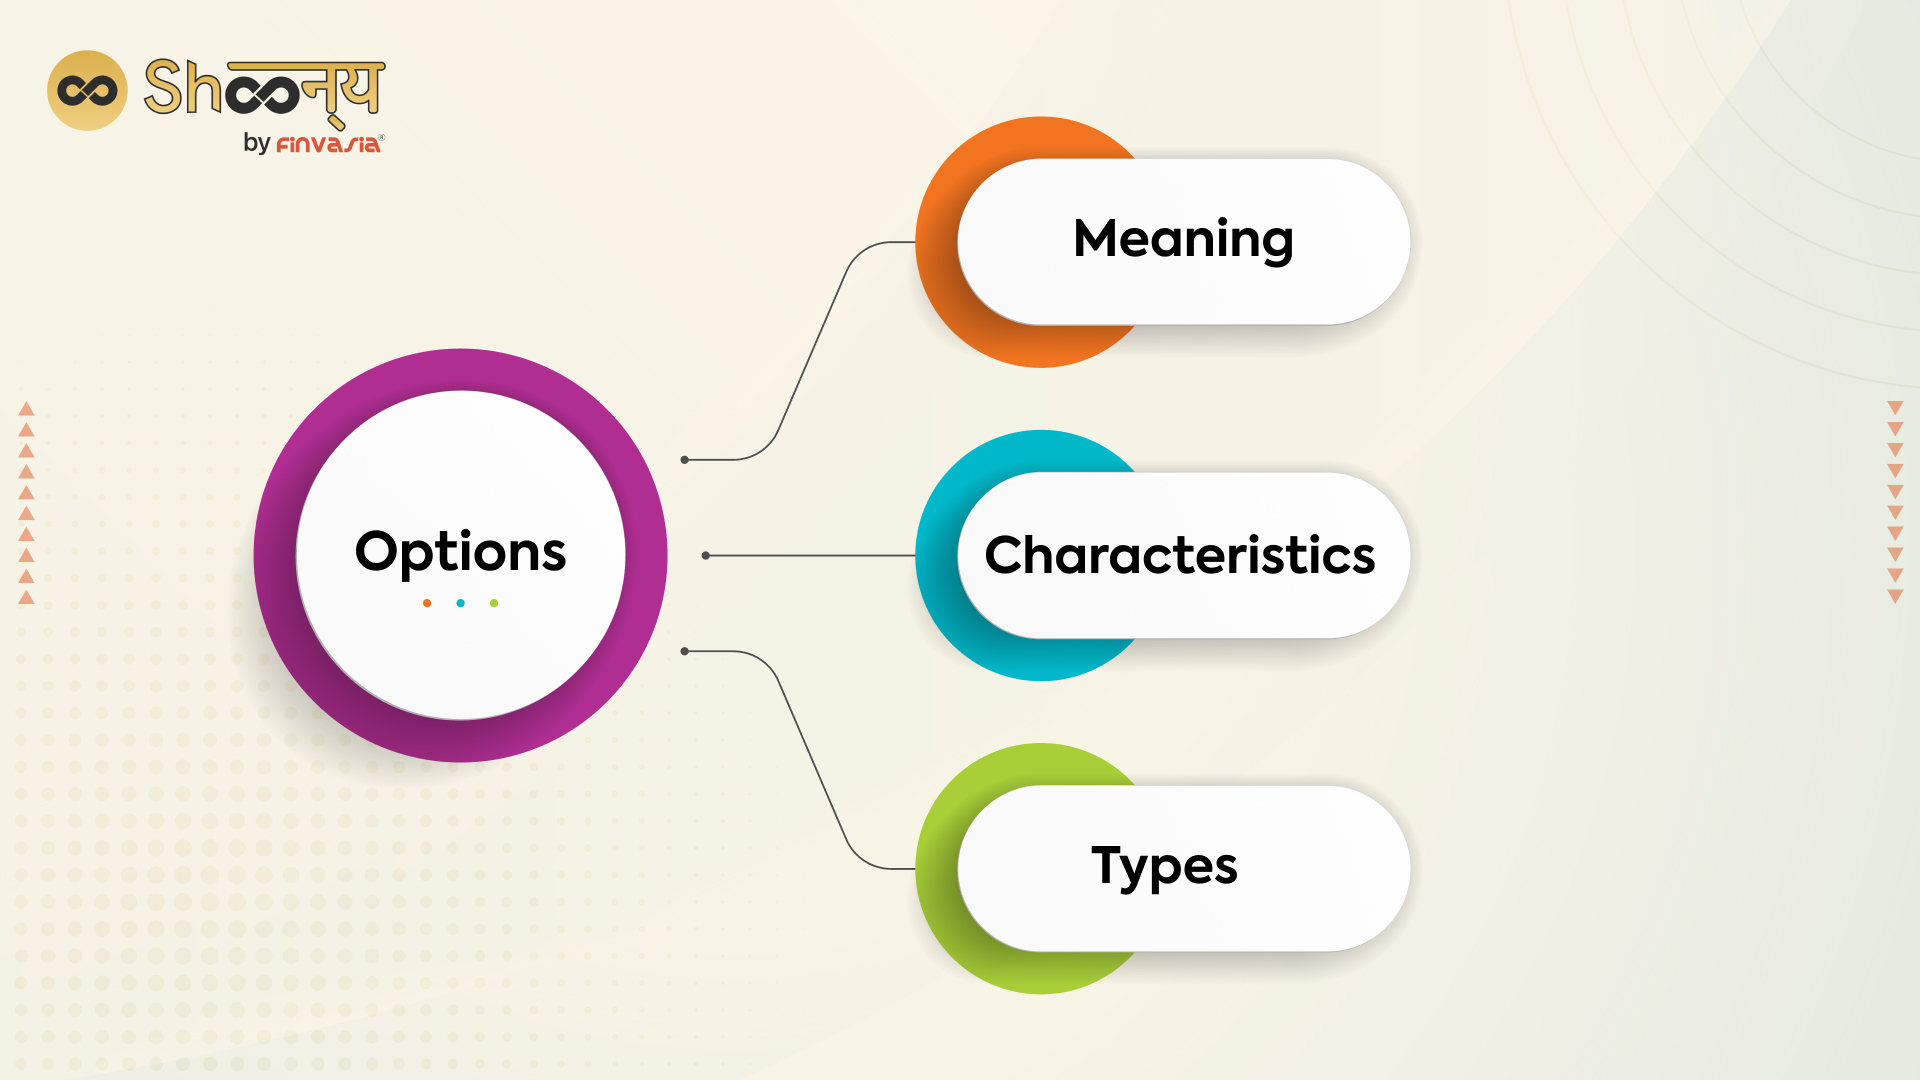 Options: Meaning, Characteristics, and Types